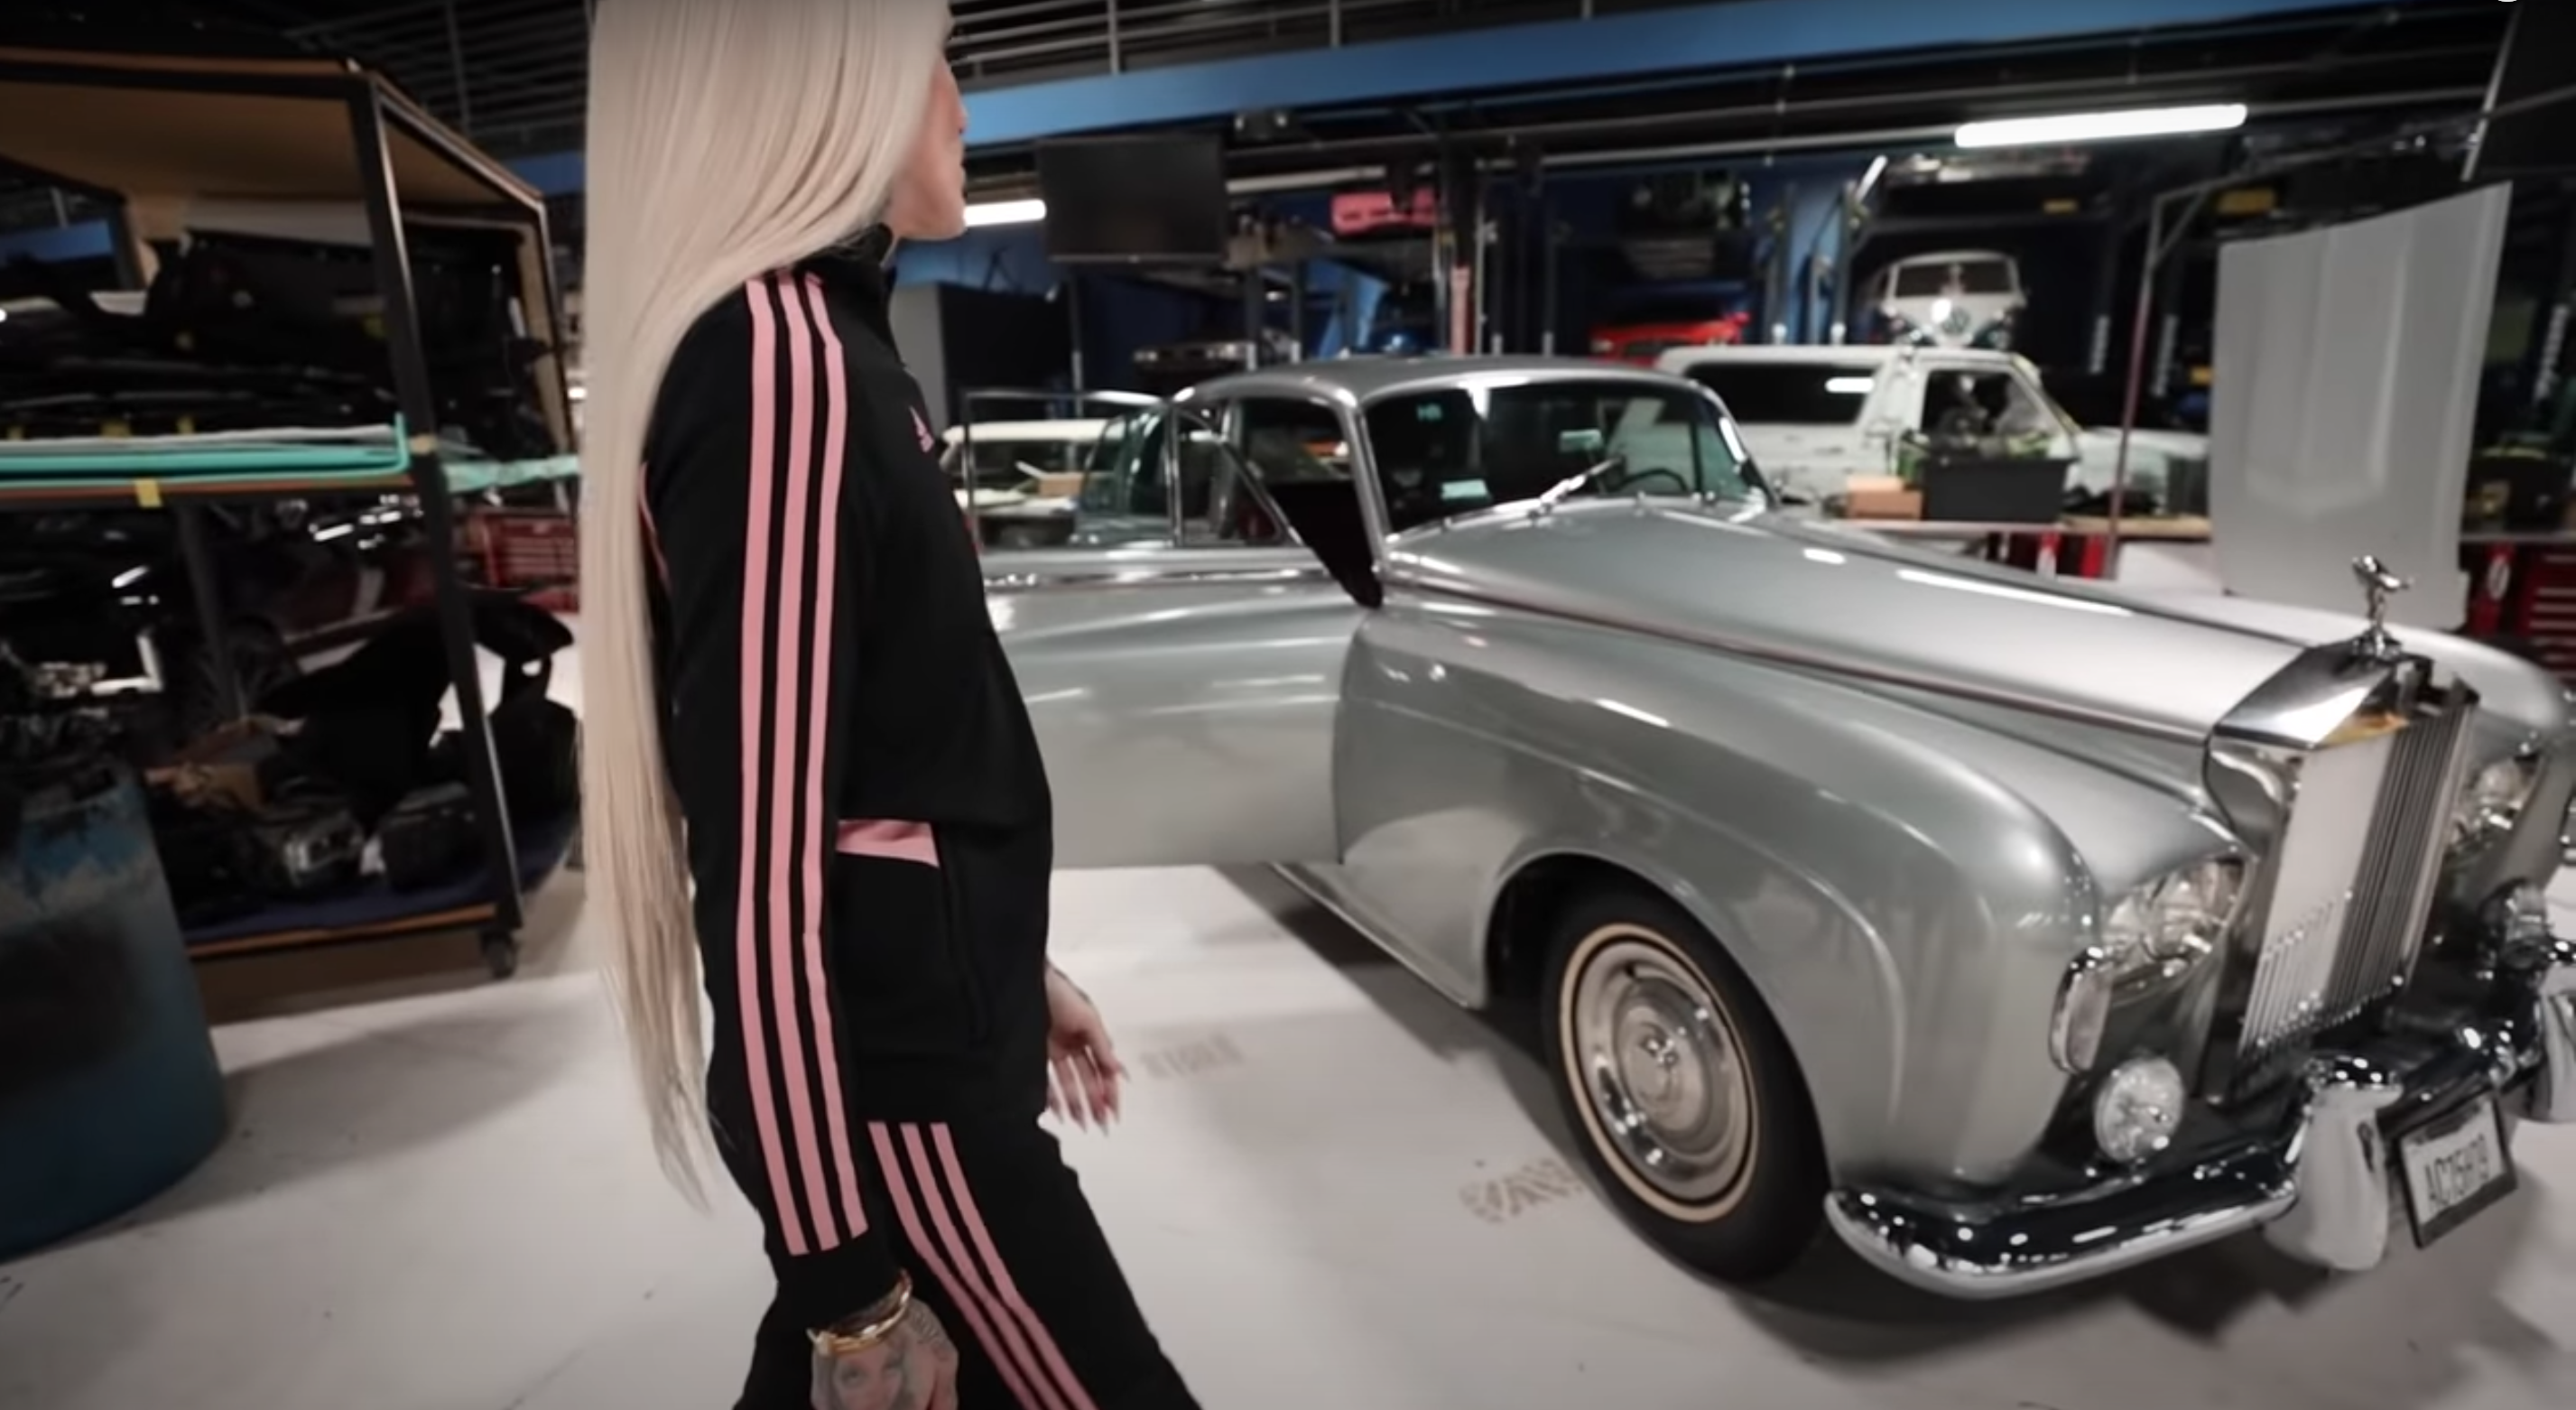 Jeffree Star Car Collection Expansive  Quirky Car Collection of YouTuber